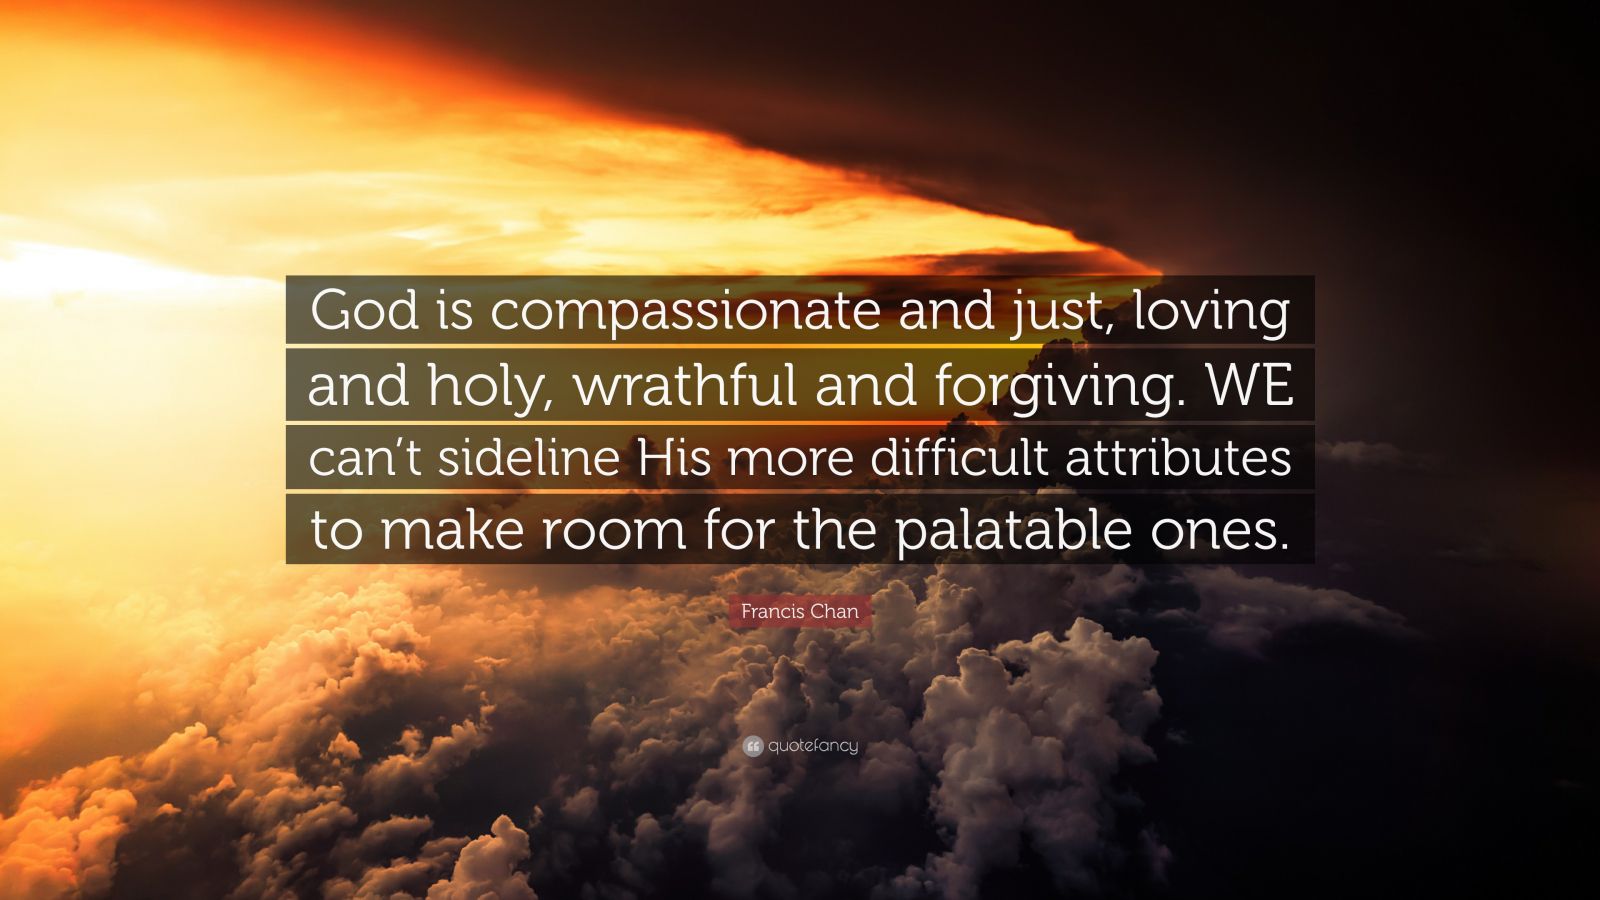 Francis Chan Quote: “God is compassionate and just, loving and holy